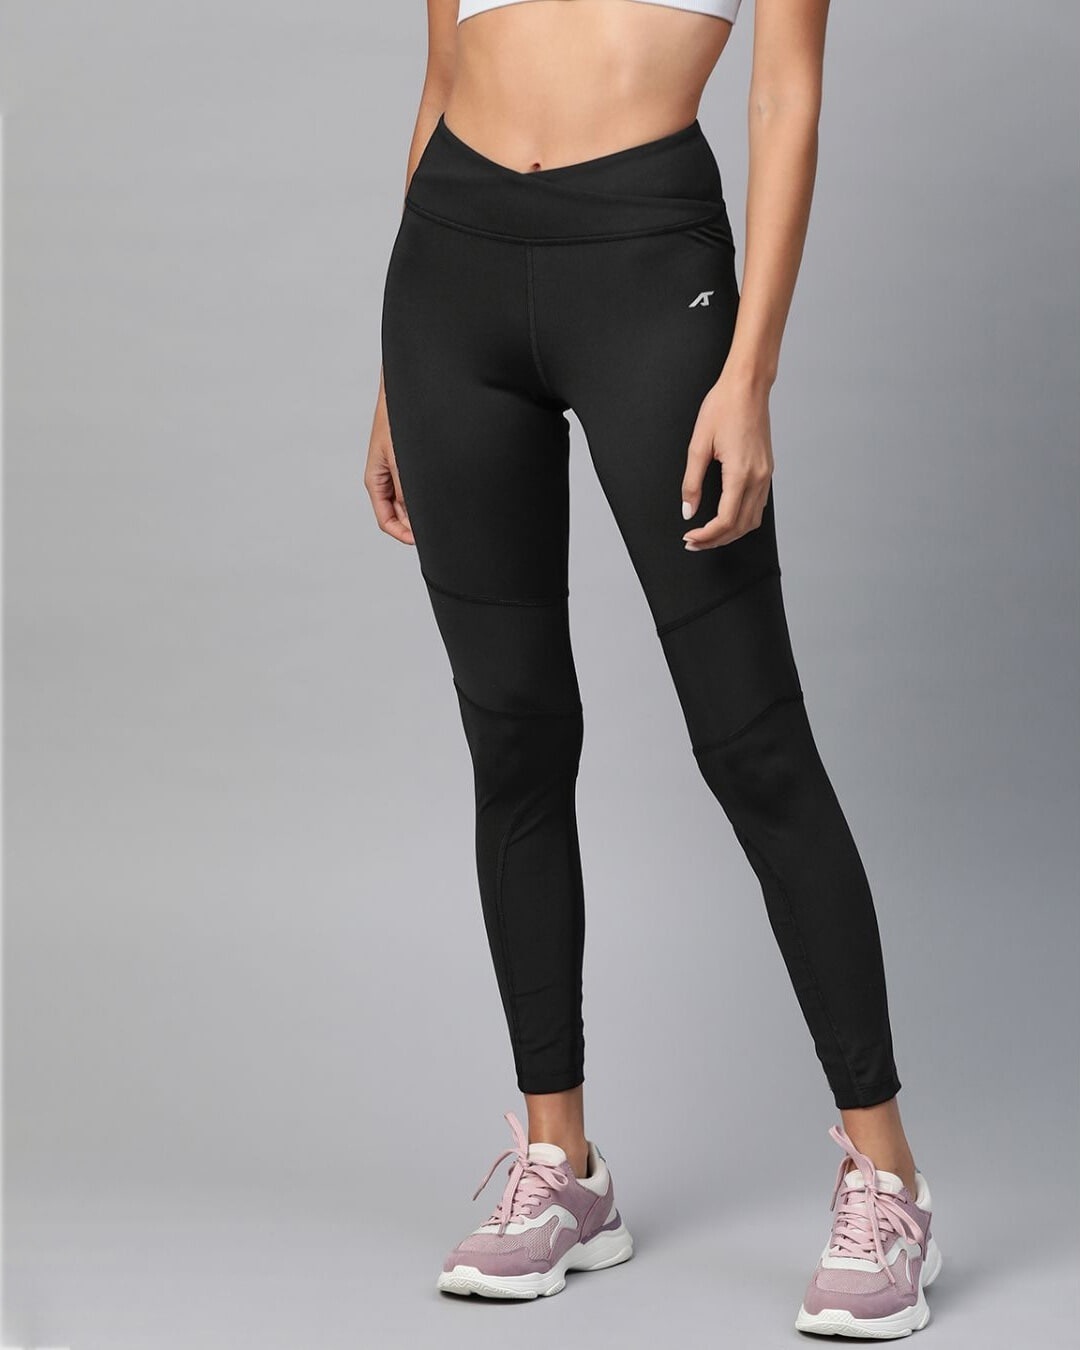 Shop Women Black Solid Cropped Tights